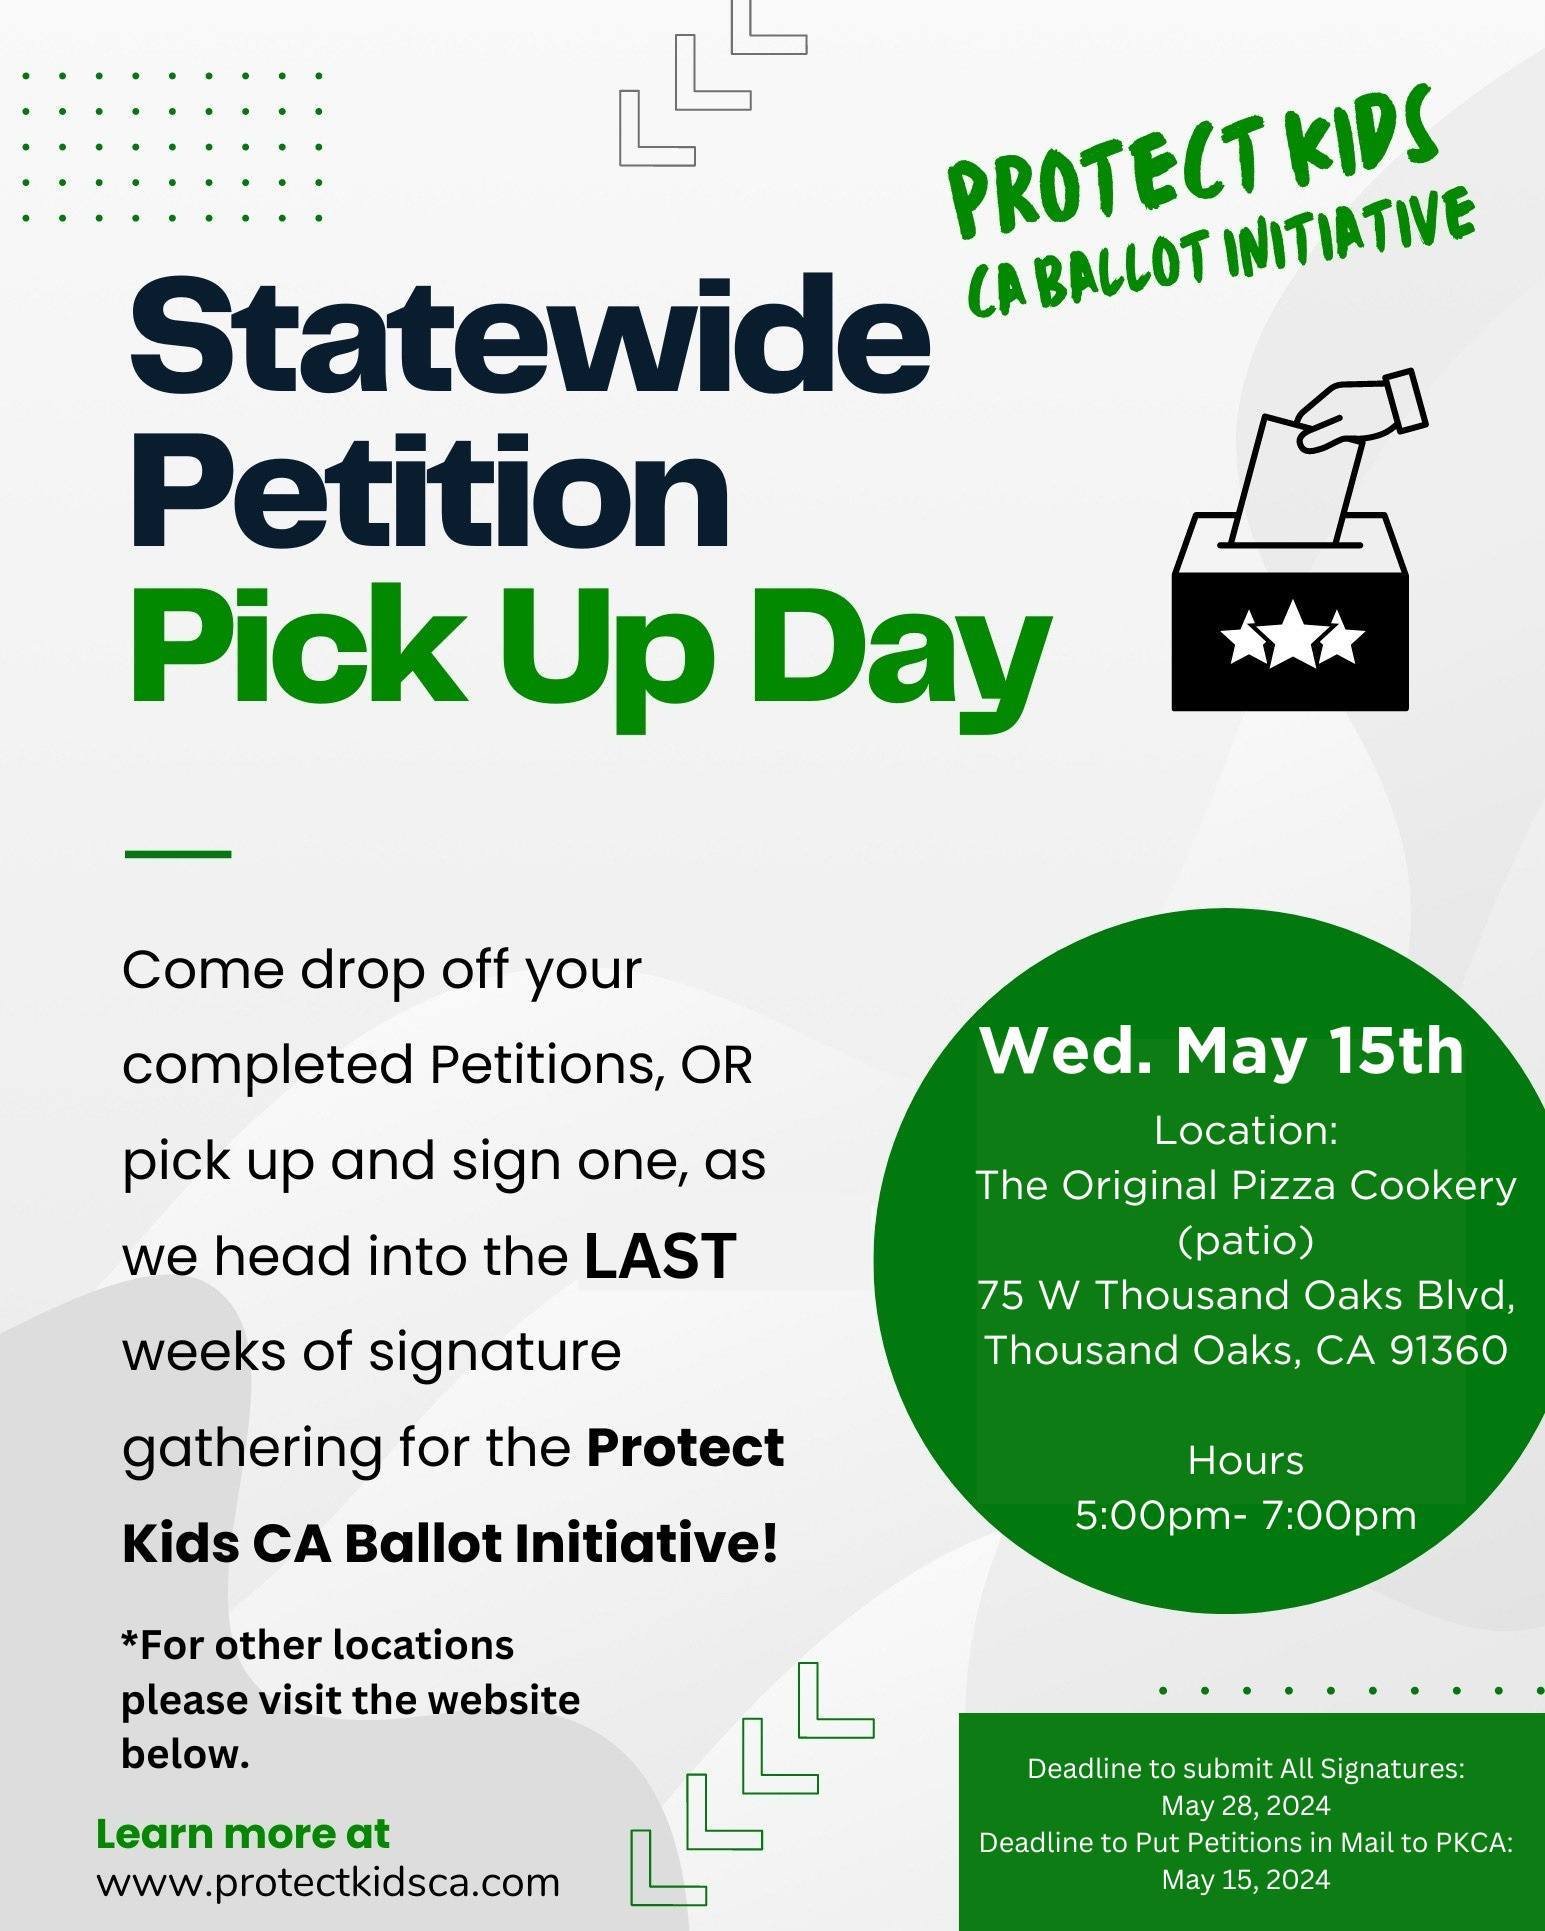 🚨🚨THIS WEDNESDAY, MAY 15TH🚨🚨 IS THE LAST DAY TO MAIL COMPLETED PETITIONS!

Join us for a Statewide Petition pick up day on Wednesday May 15th. PERK will be at The Original Pizza Cookery in Thousand Oaks CA from 5:00-7:00 pm

To locate a pickup sp